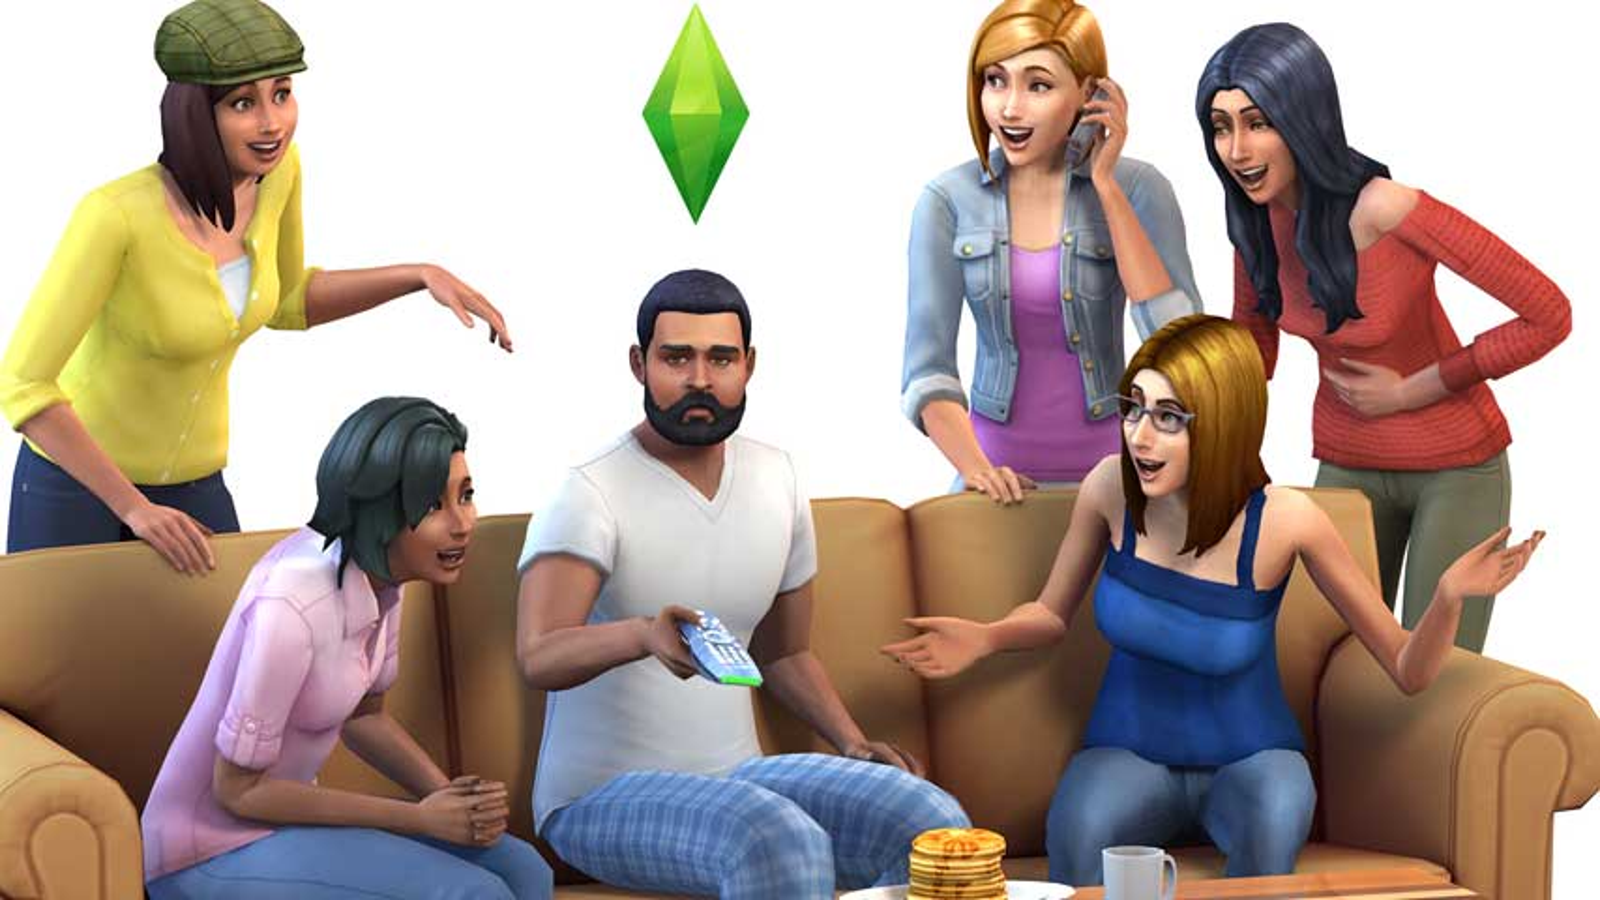 The Sims - Free PS4 codes for Simmers in Europe, Australia, and